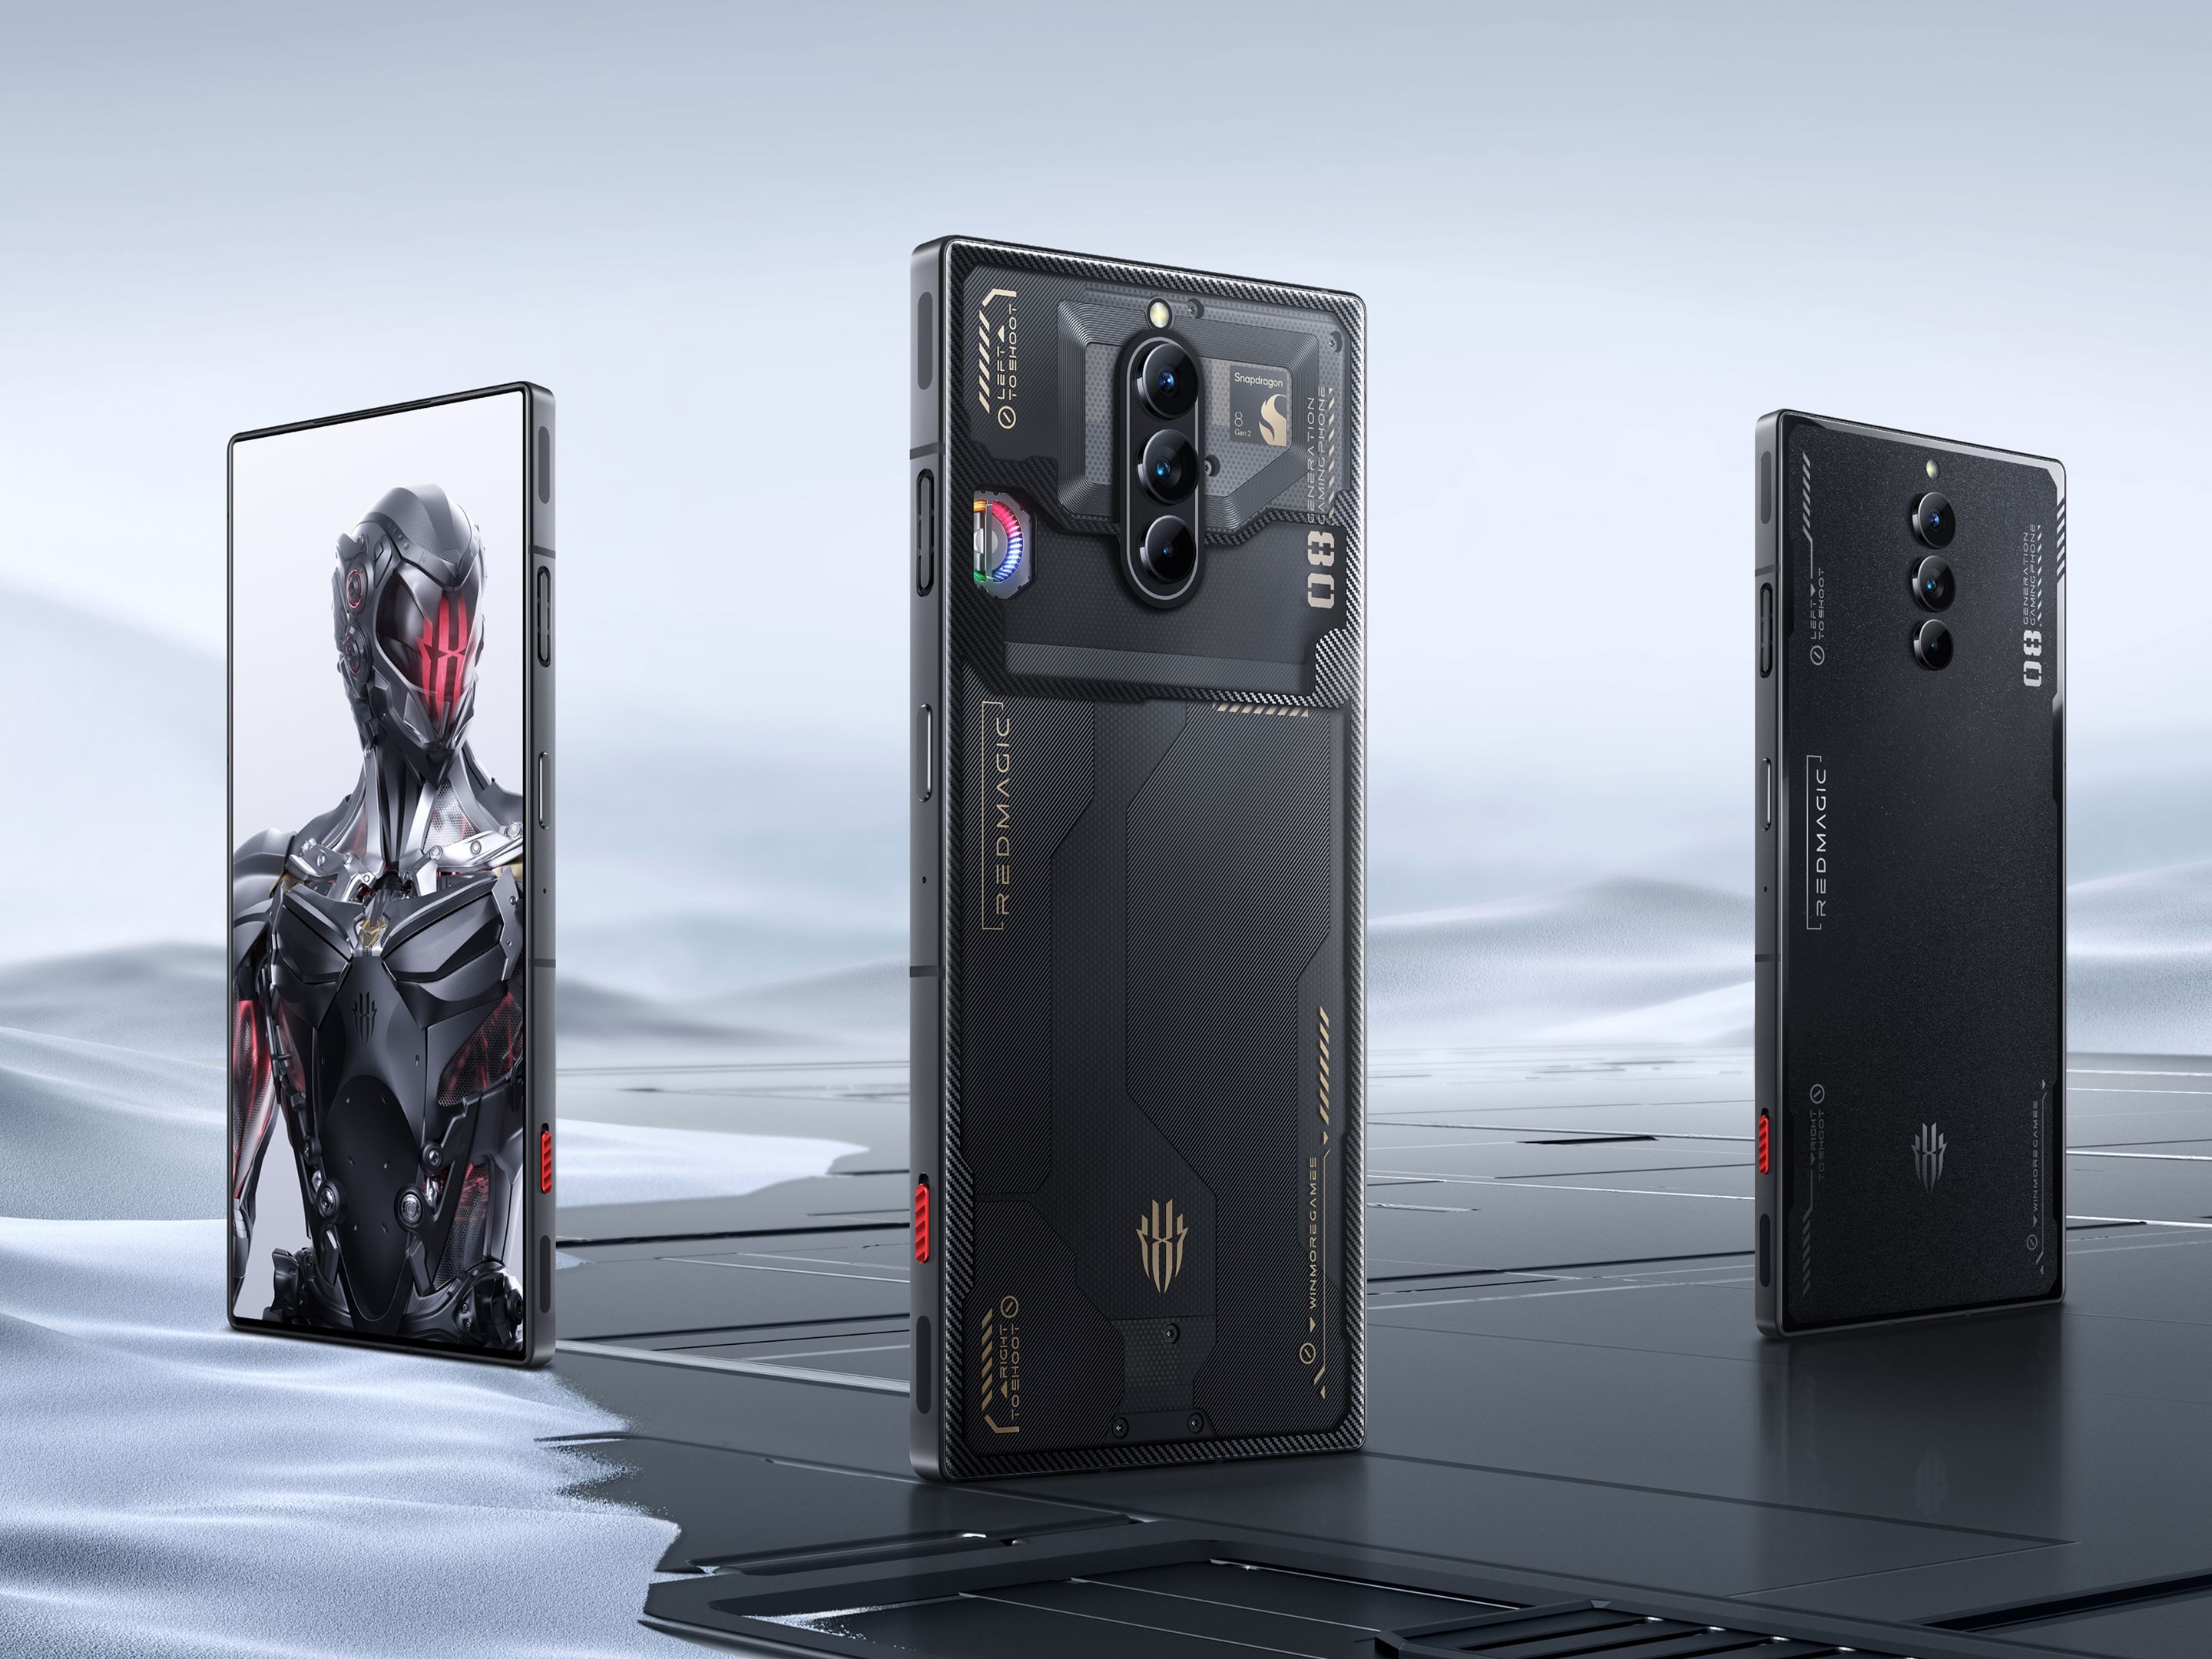 The RedMagic 8 Pro will release in two configurations, which have different designs. - The RedMagic 8 Pro gaming phone is going global this February